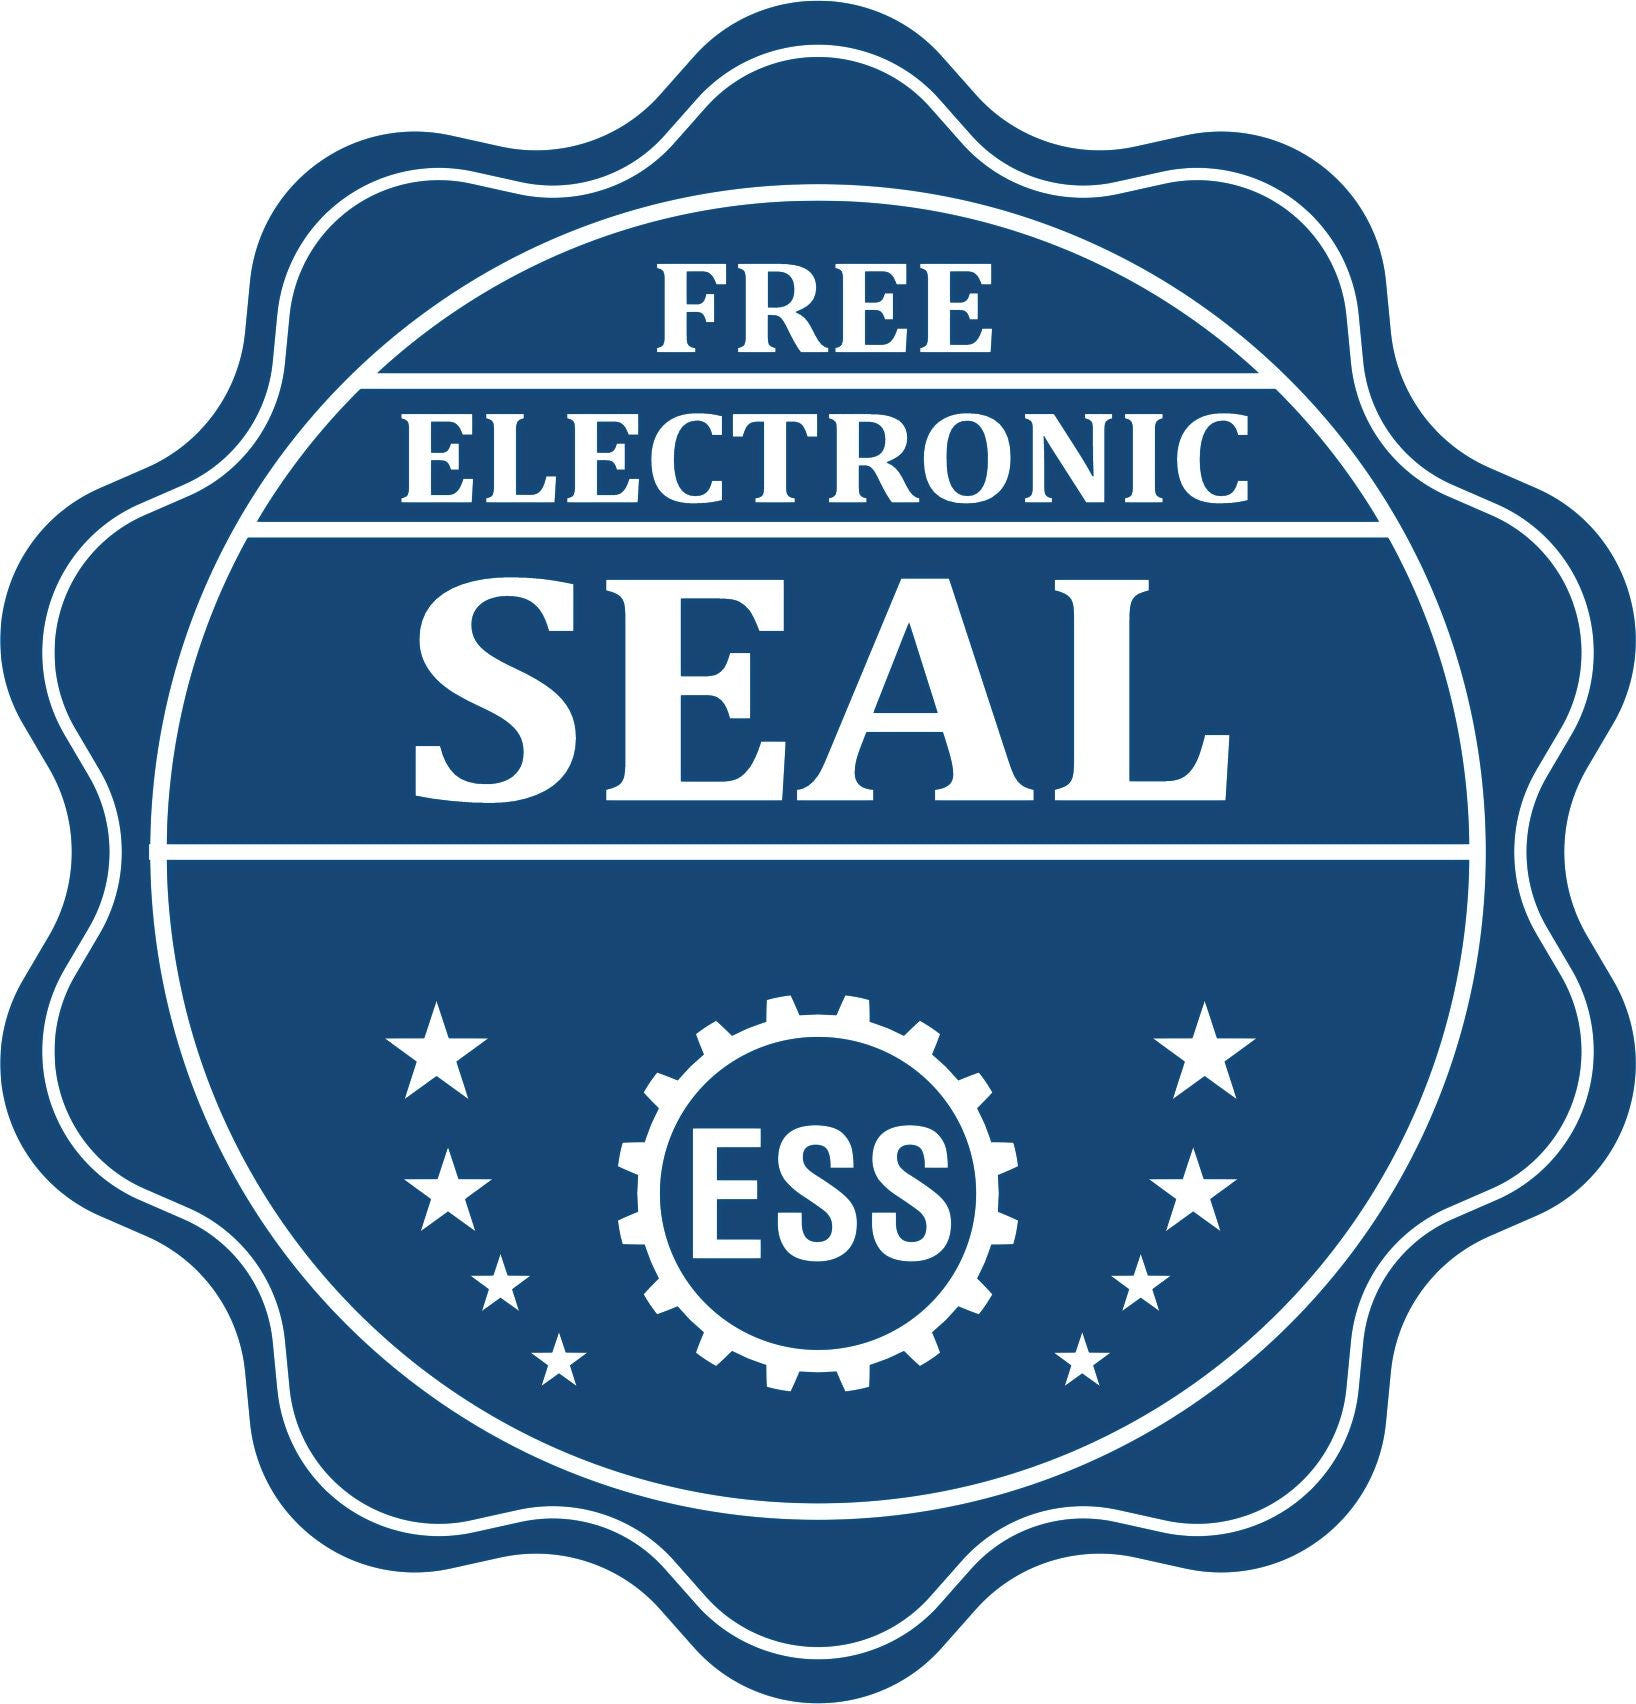 A badge showing a free electronic seal for the Gift Montana Land Surveyor Seal with stars and the ESS gear on the emblem.